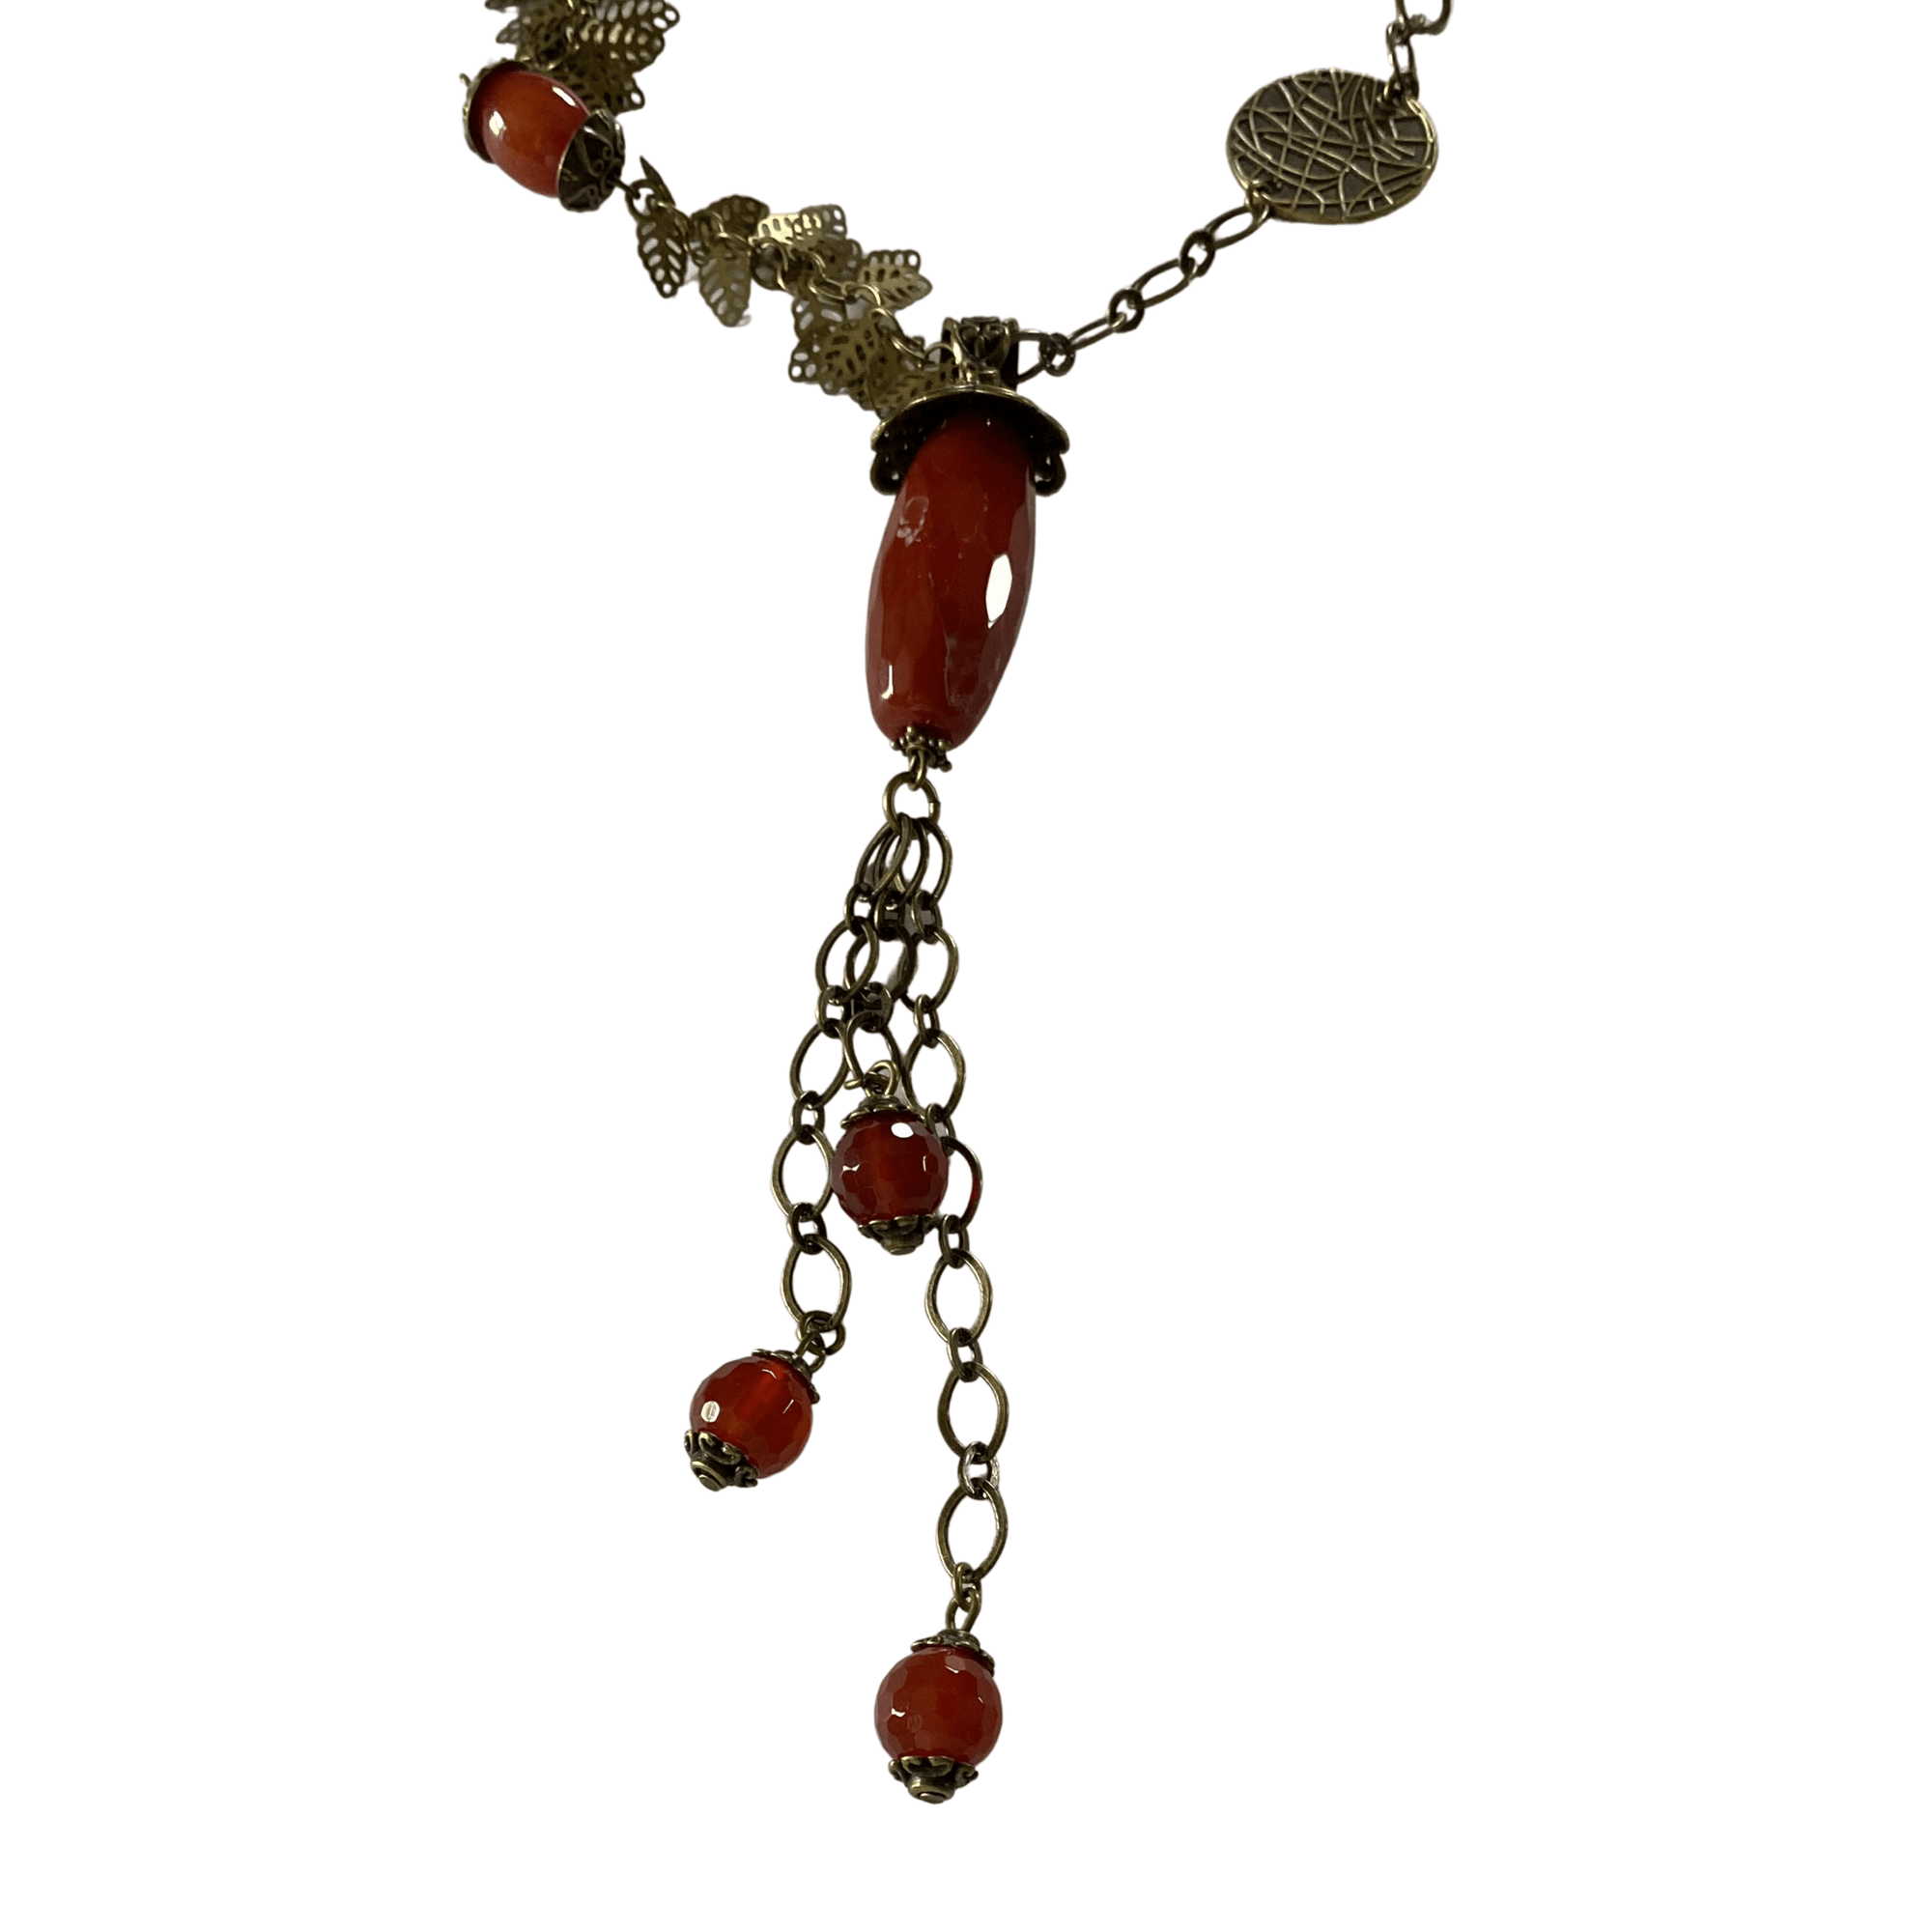 Antique Brass Chain and Carnelian Stone Pendant Necklace with Leaf Toggle Clasp-Necklaces- Creative Jewelry by Marcia